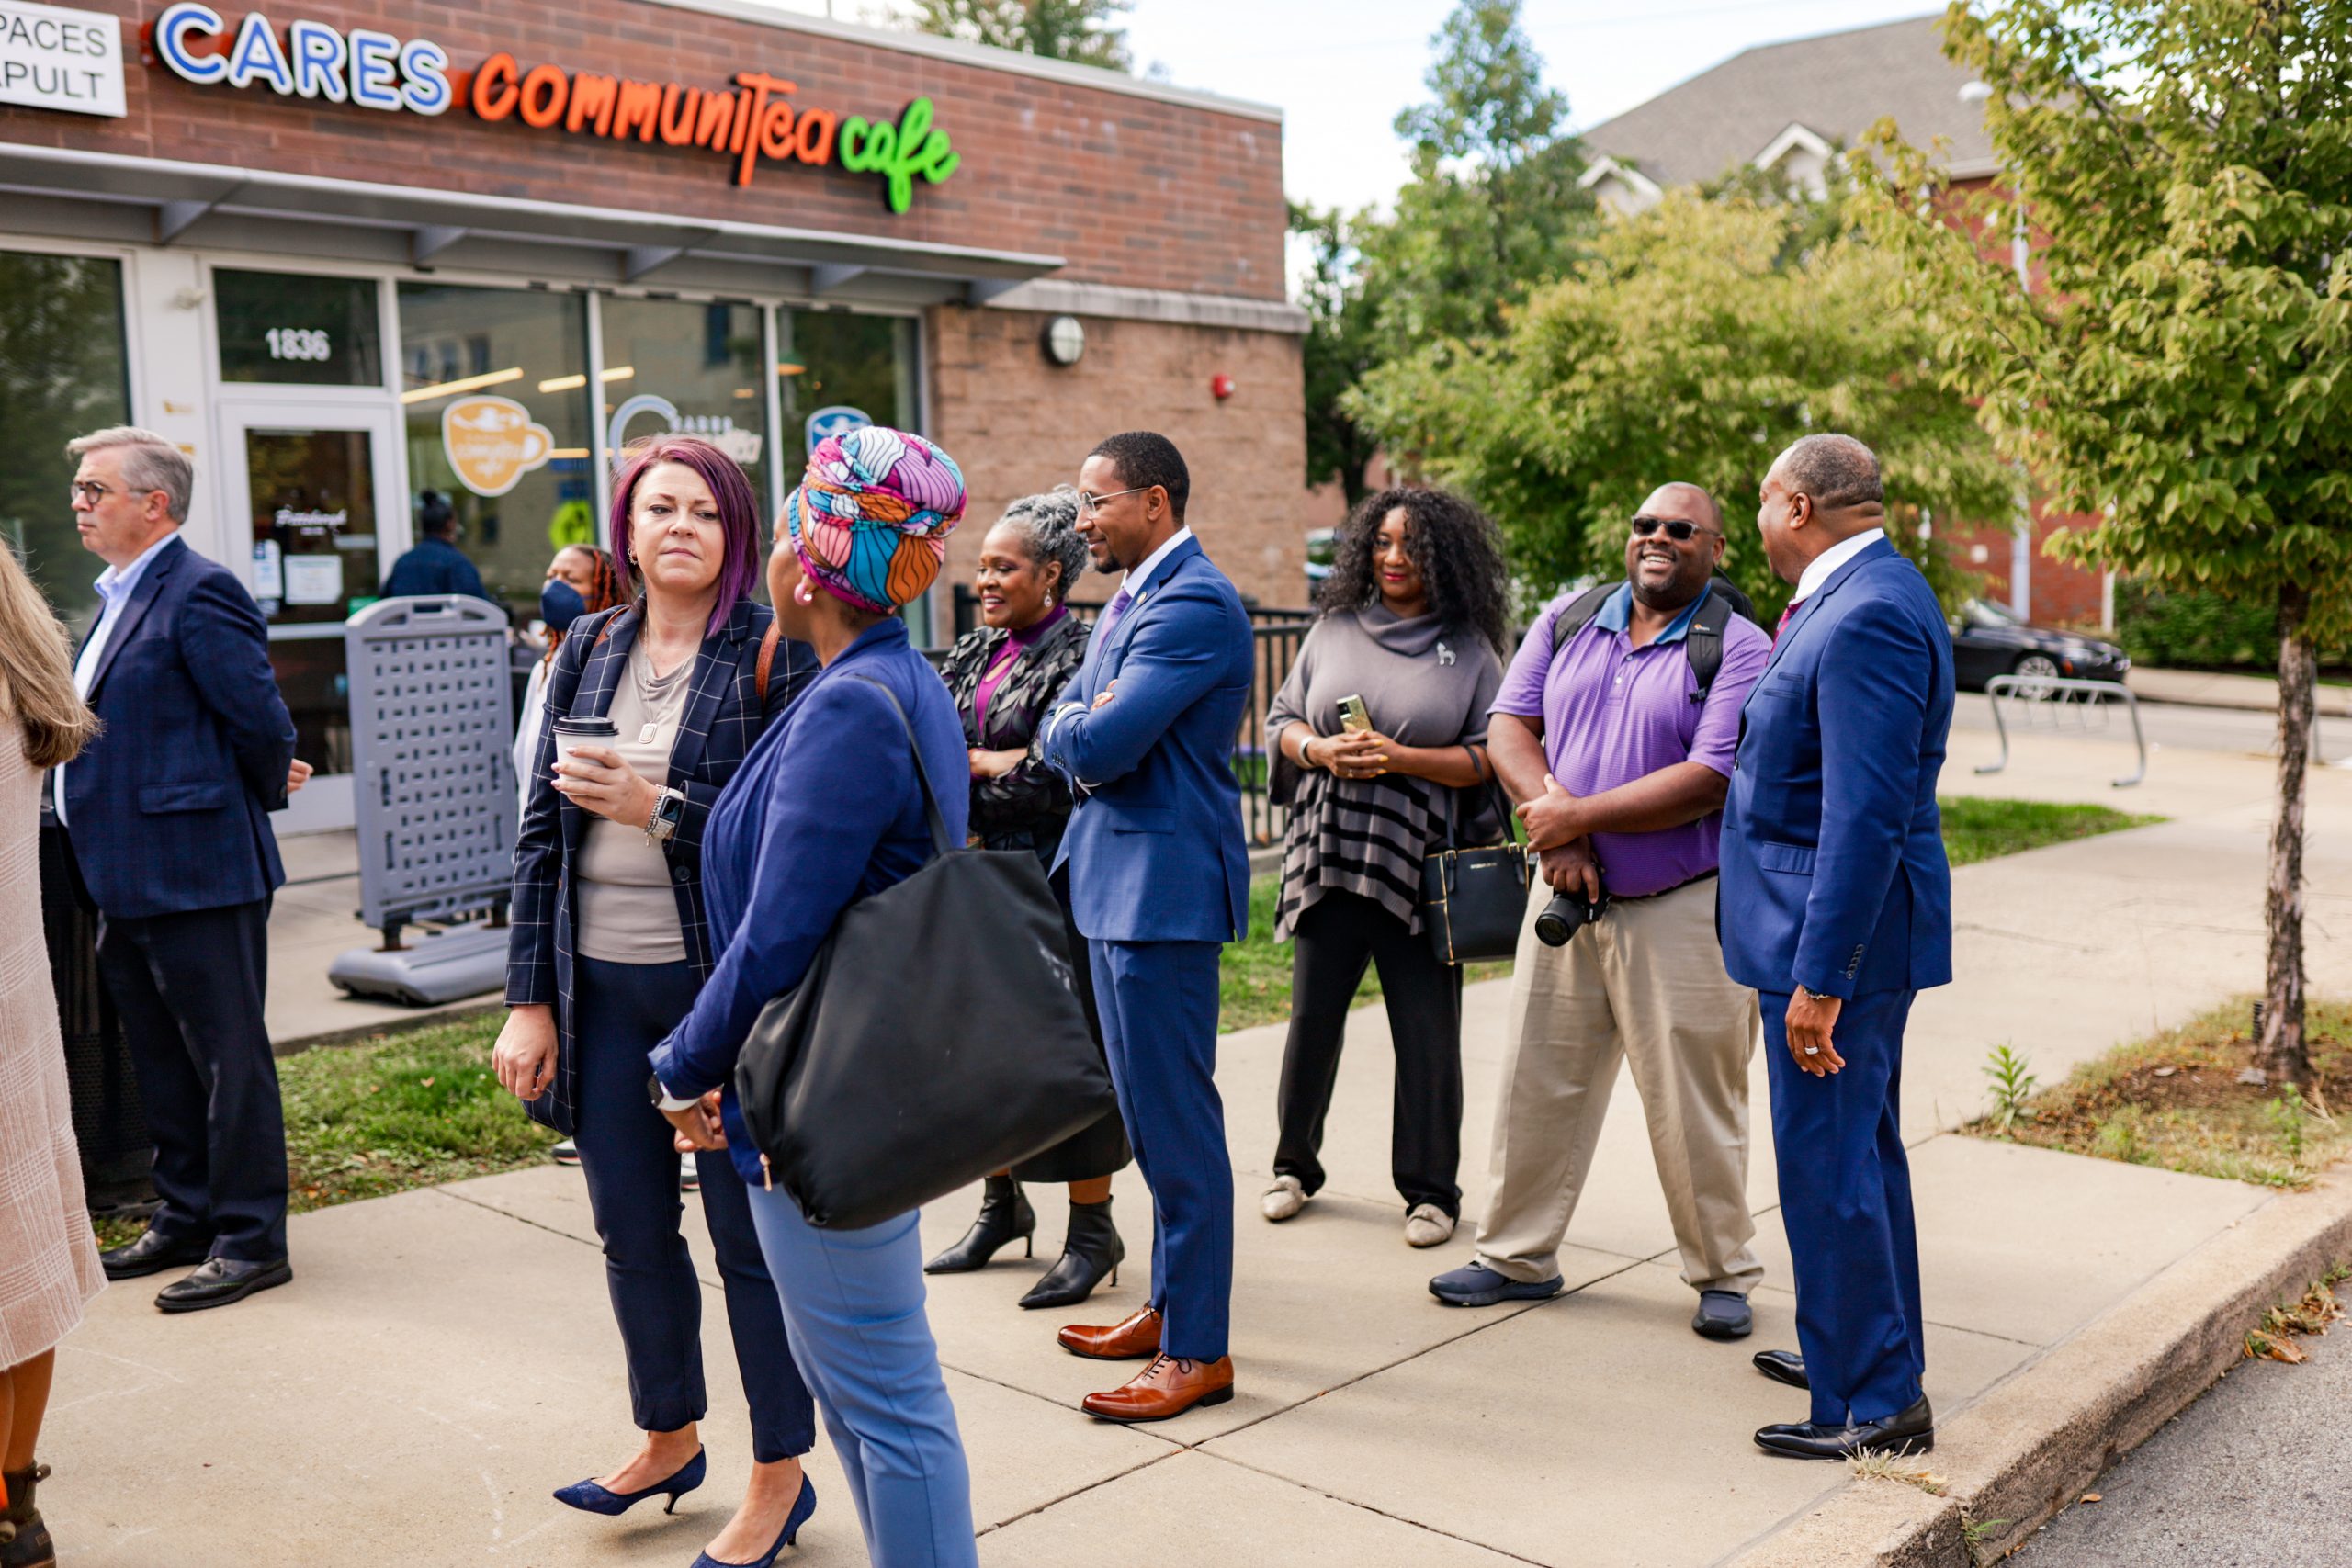 A crowd of people stand outside along a sidewalk. Behind them, you can see the entrance of the CARES Communitea Cafe in the Hill District.